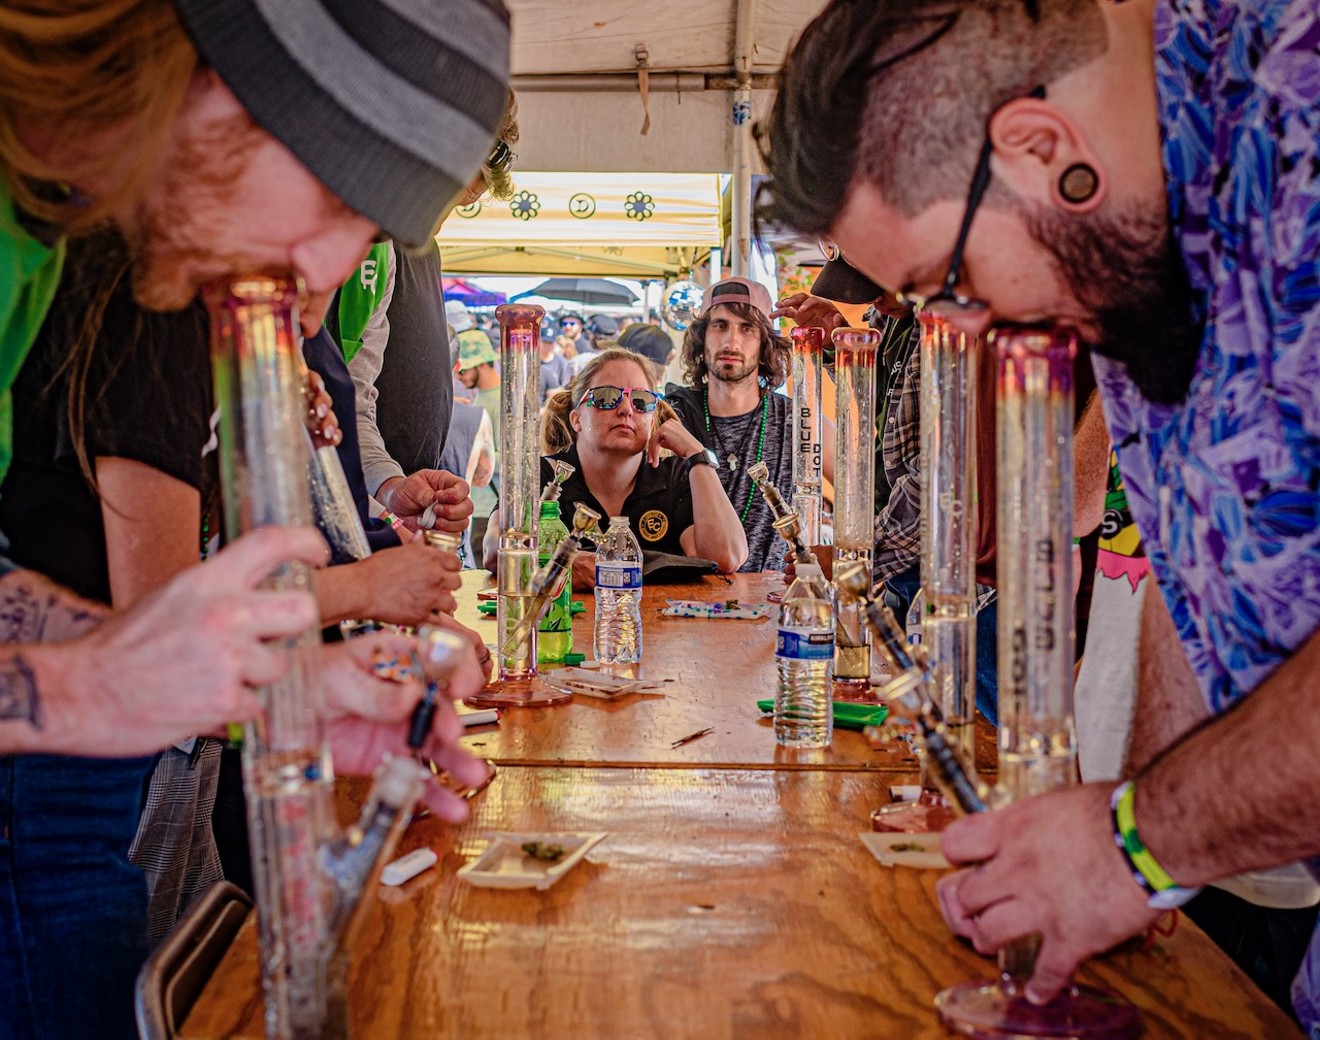 Contestants in the Bong Wars during Errl Cup in March. The festival celebrates Arizona weed, which reached $1.43 billion in sales last year.